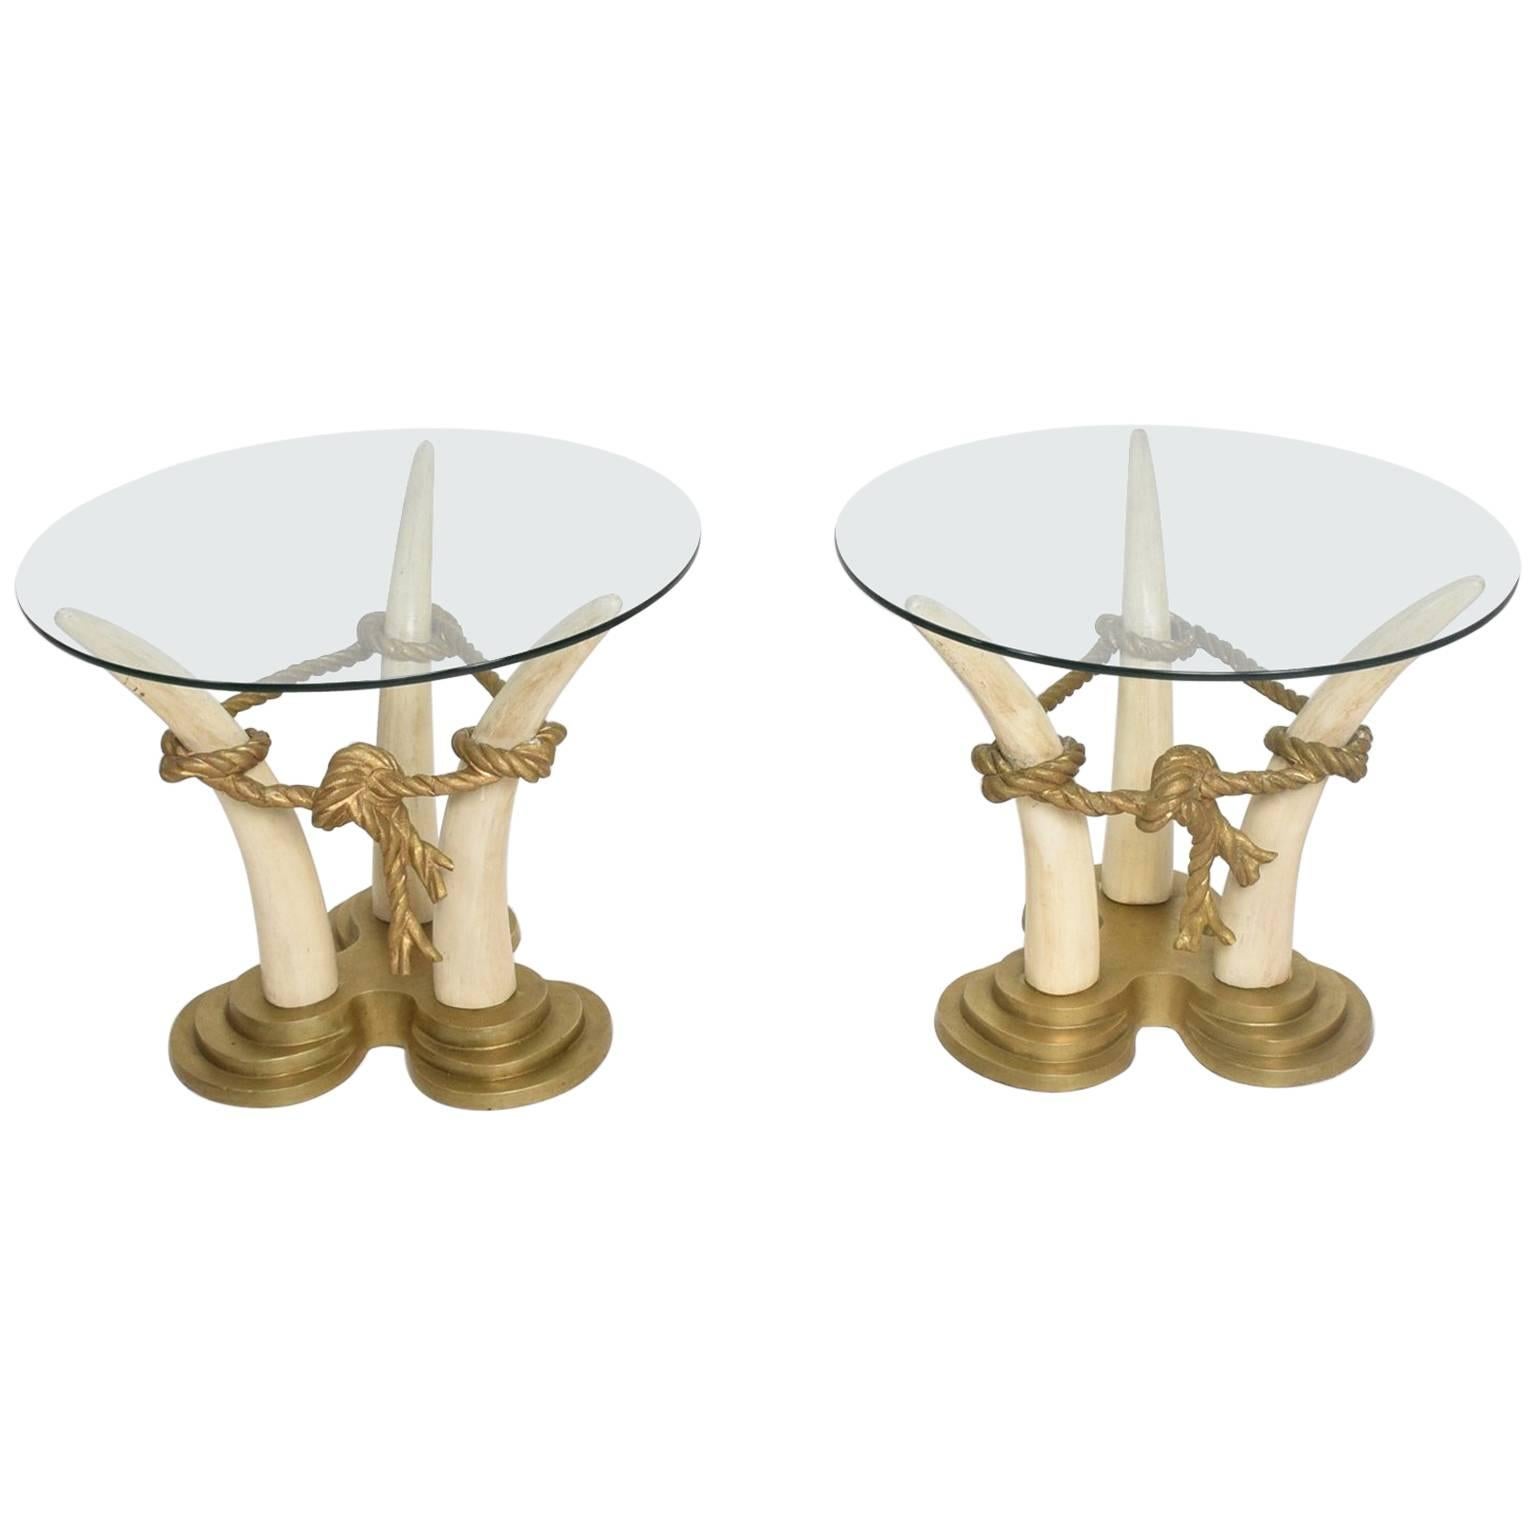 Hollywood Regency Pair of Side Tables Faux Ivory and Bronze by Valenti, Spain